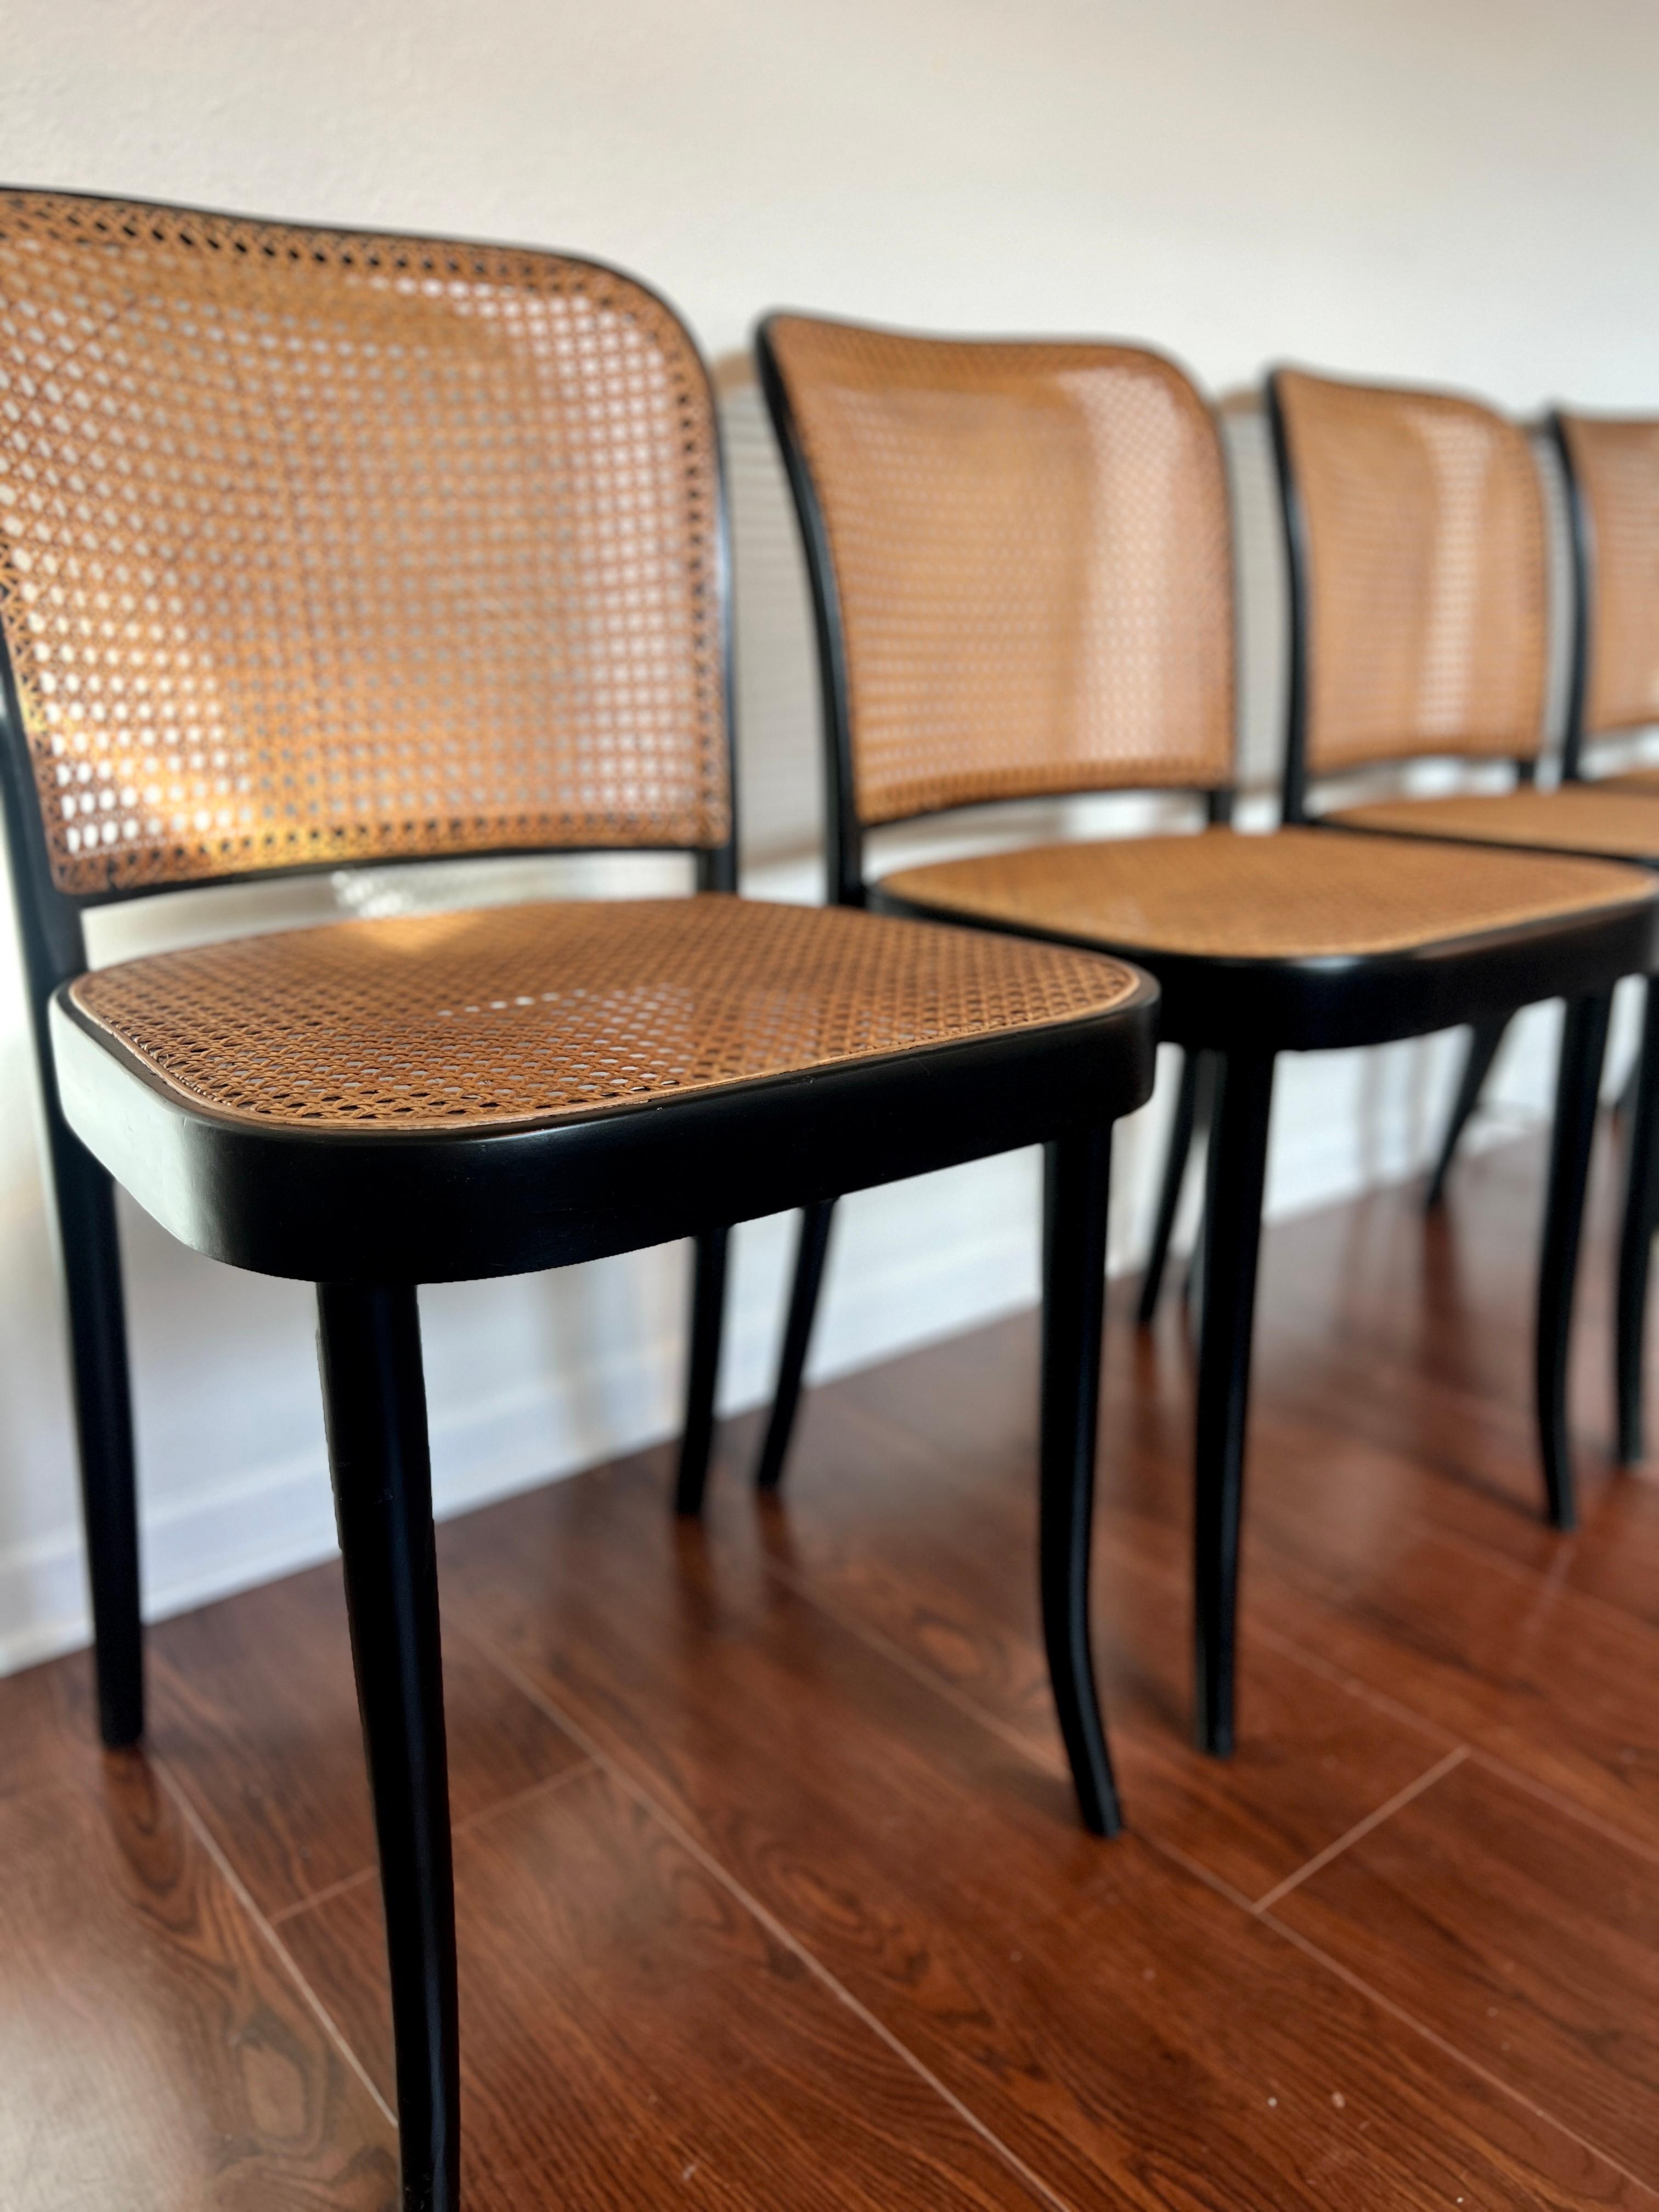 Cane A set of of 4 original chairs by Josef Hoffmann for Thonet, circa 1960s